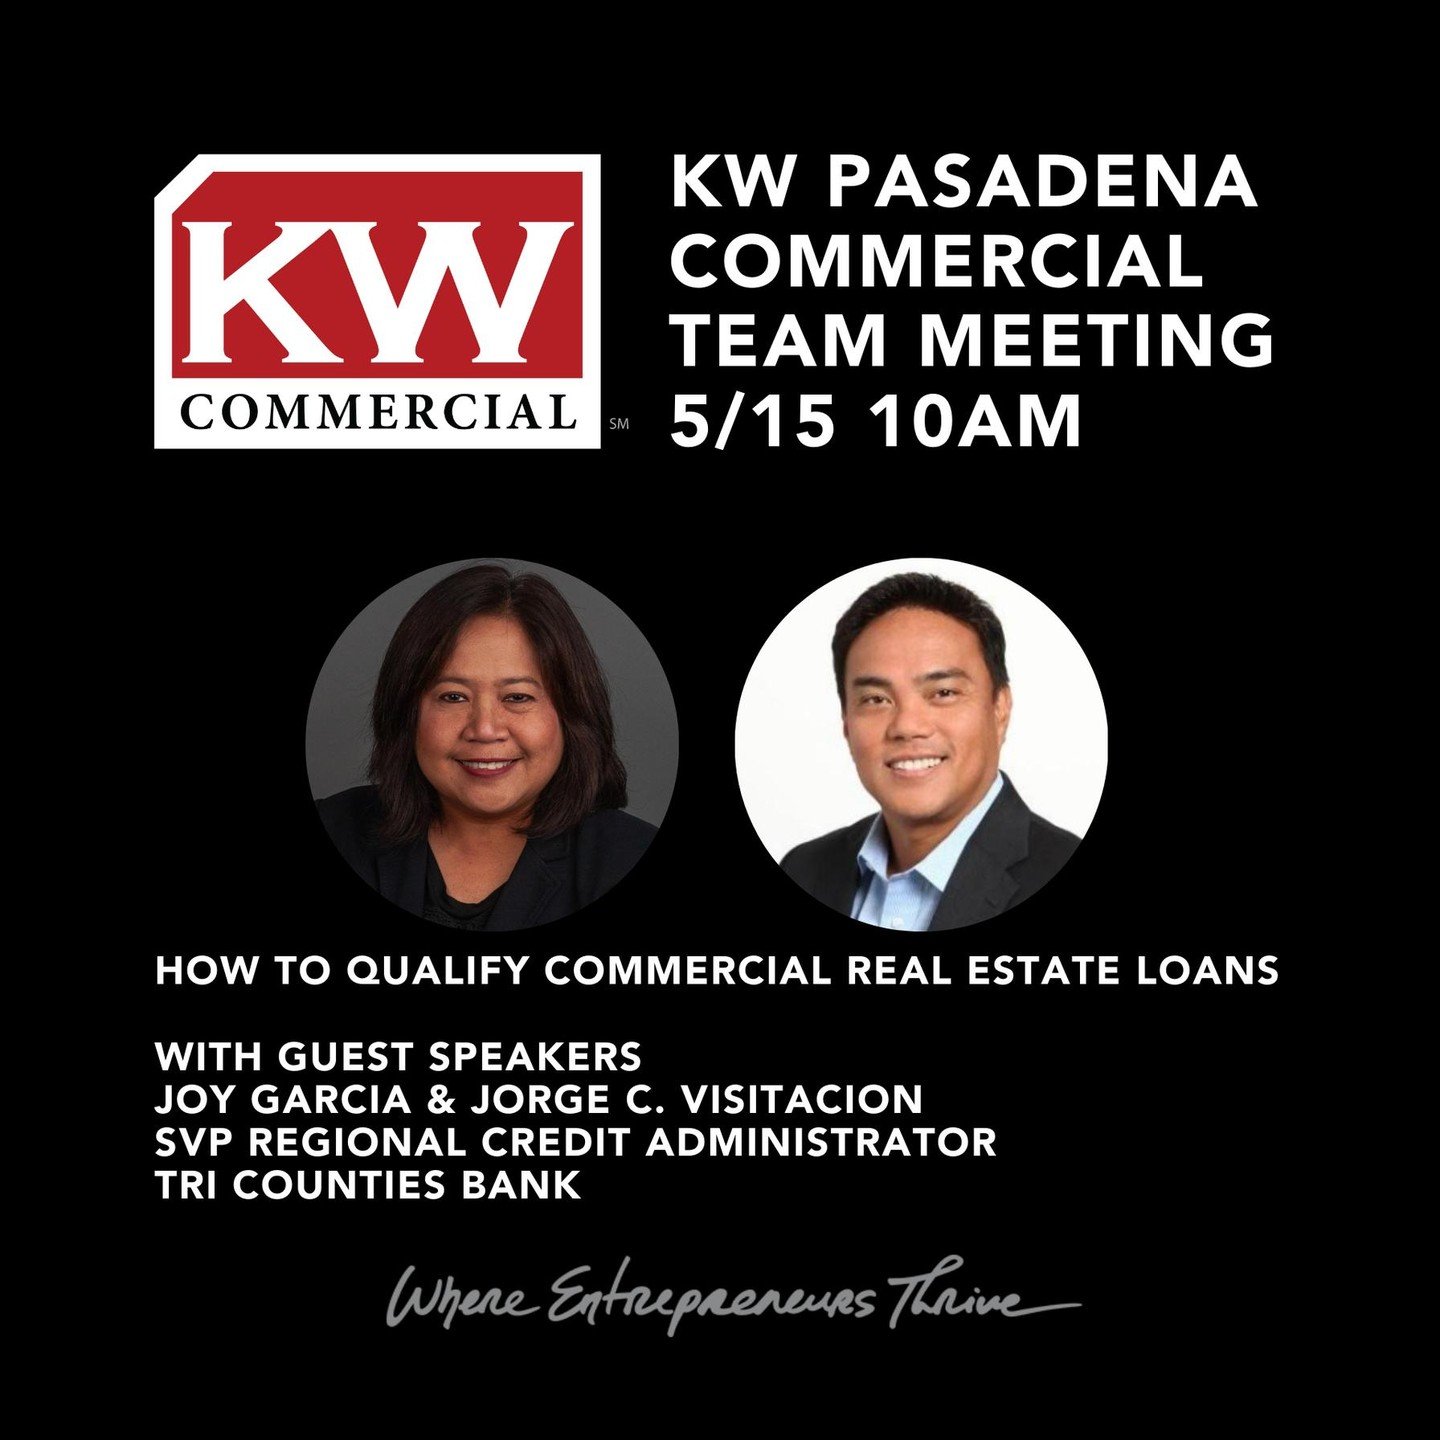 KW Commercial Pasadena Team Meeting with Special Guest Speaker Joy Garcia from Tri Counties Bank. 
If you are a non-Keller Williams Commercial Agent, and open to talking about how to increase your business DM me or contact me with my information belo